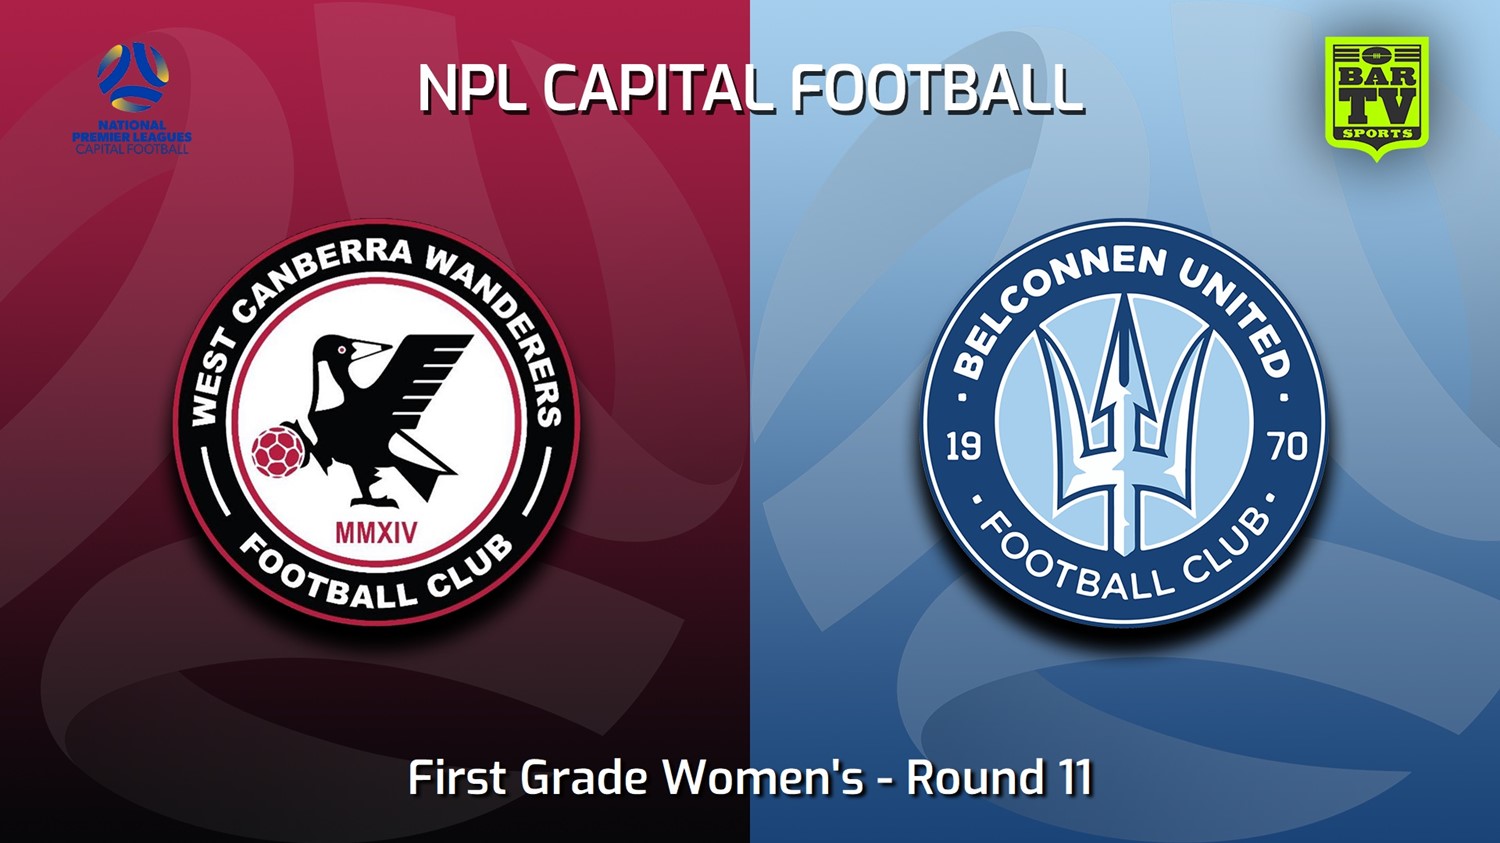 230618-Capital Womens Round 11 - West Canberra Wanderers FC (women) v Belconnen United (women) (1) Minigame Slate Image